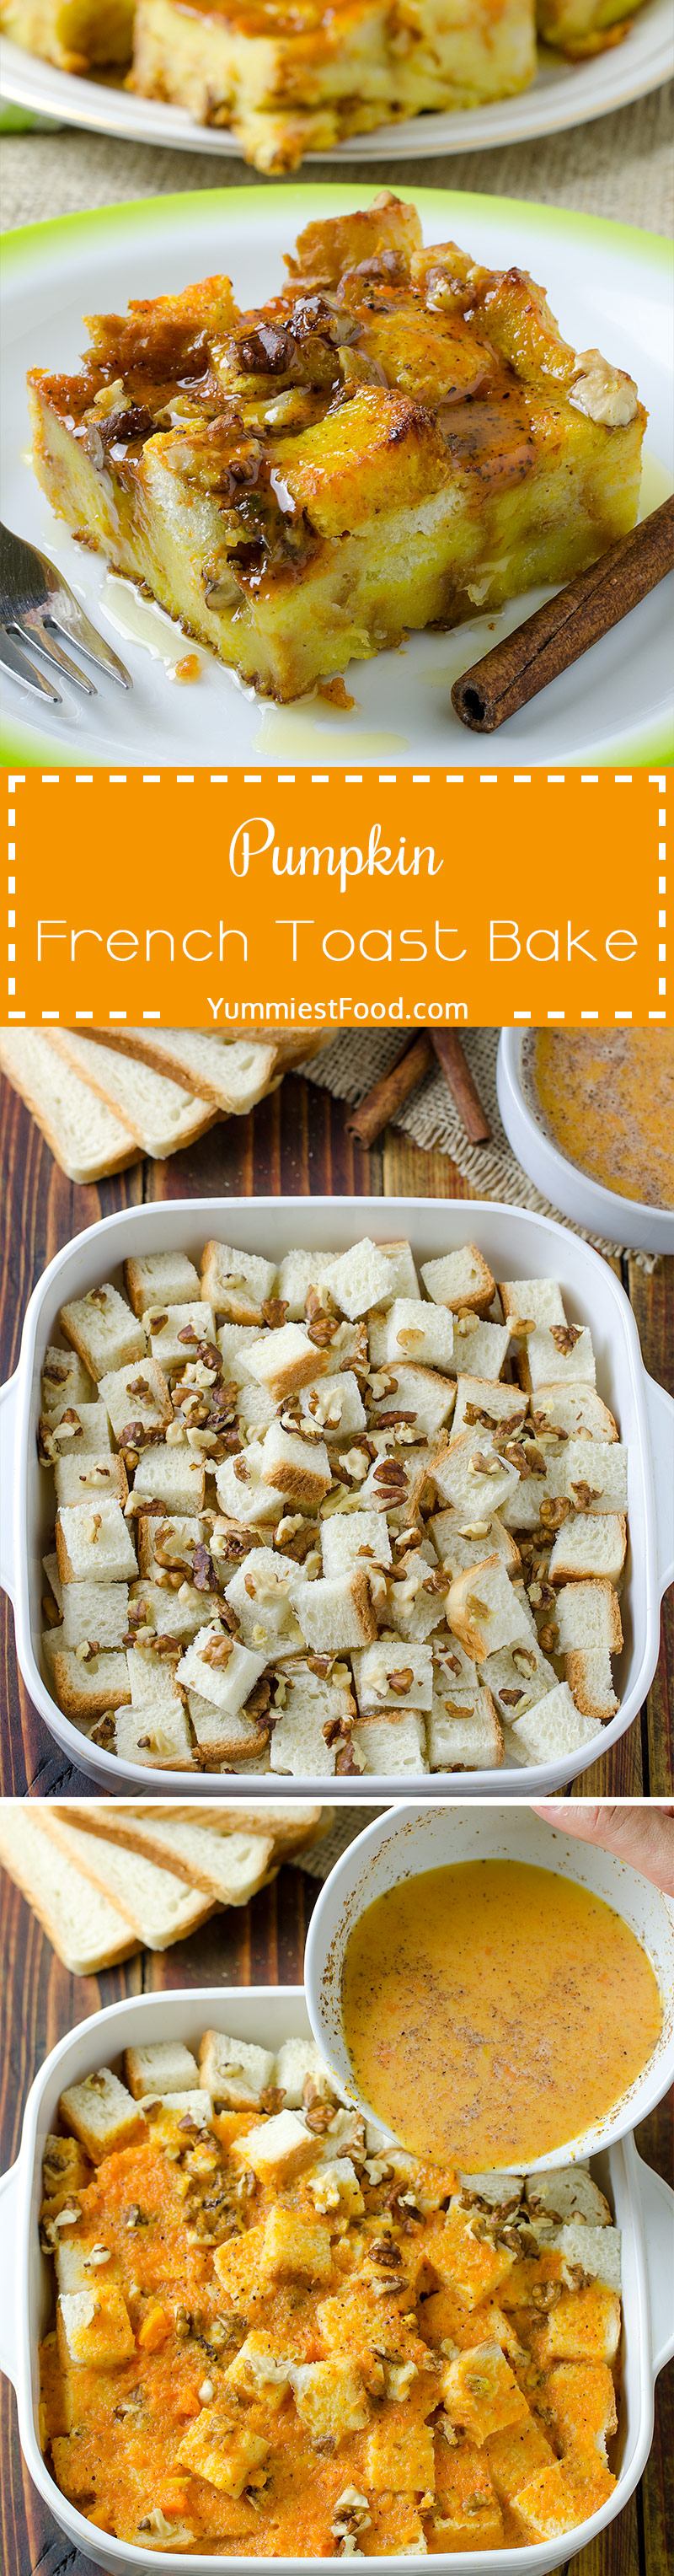 EASY PUMPKIN FRENCH TOAST BAKE - Quick and Easy breakfast recipe